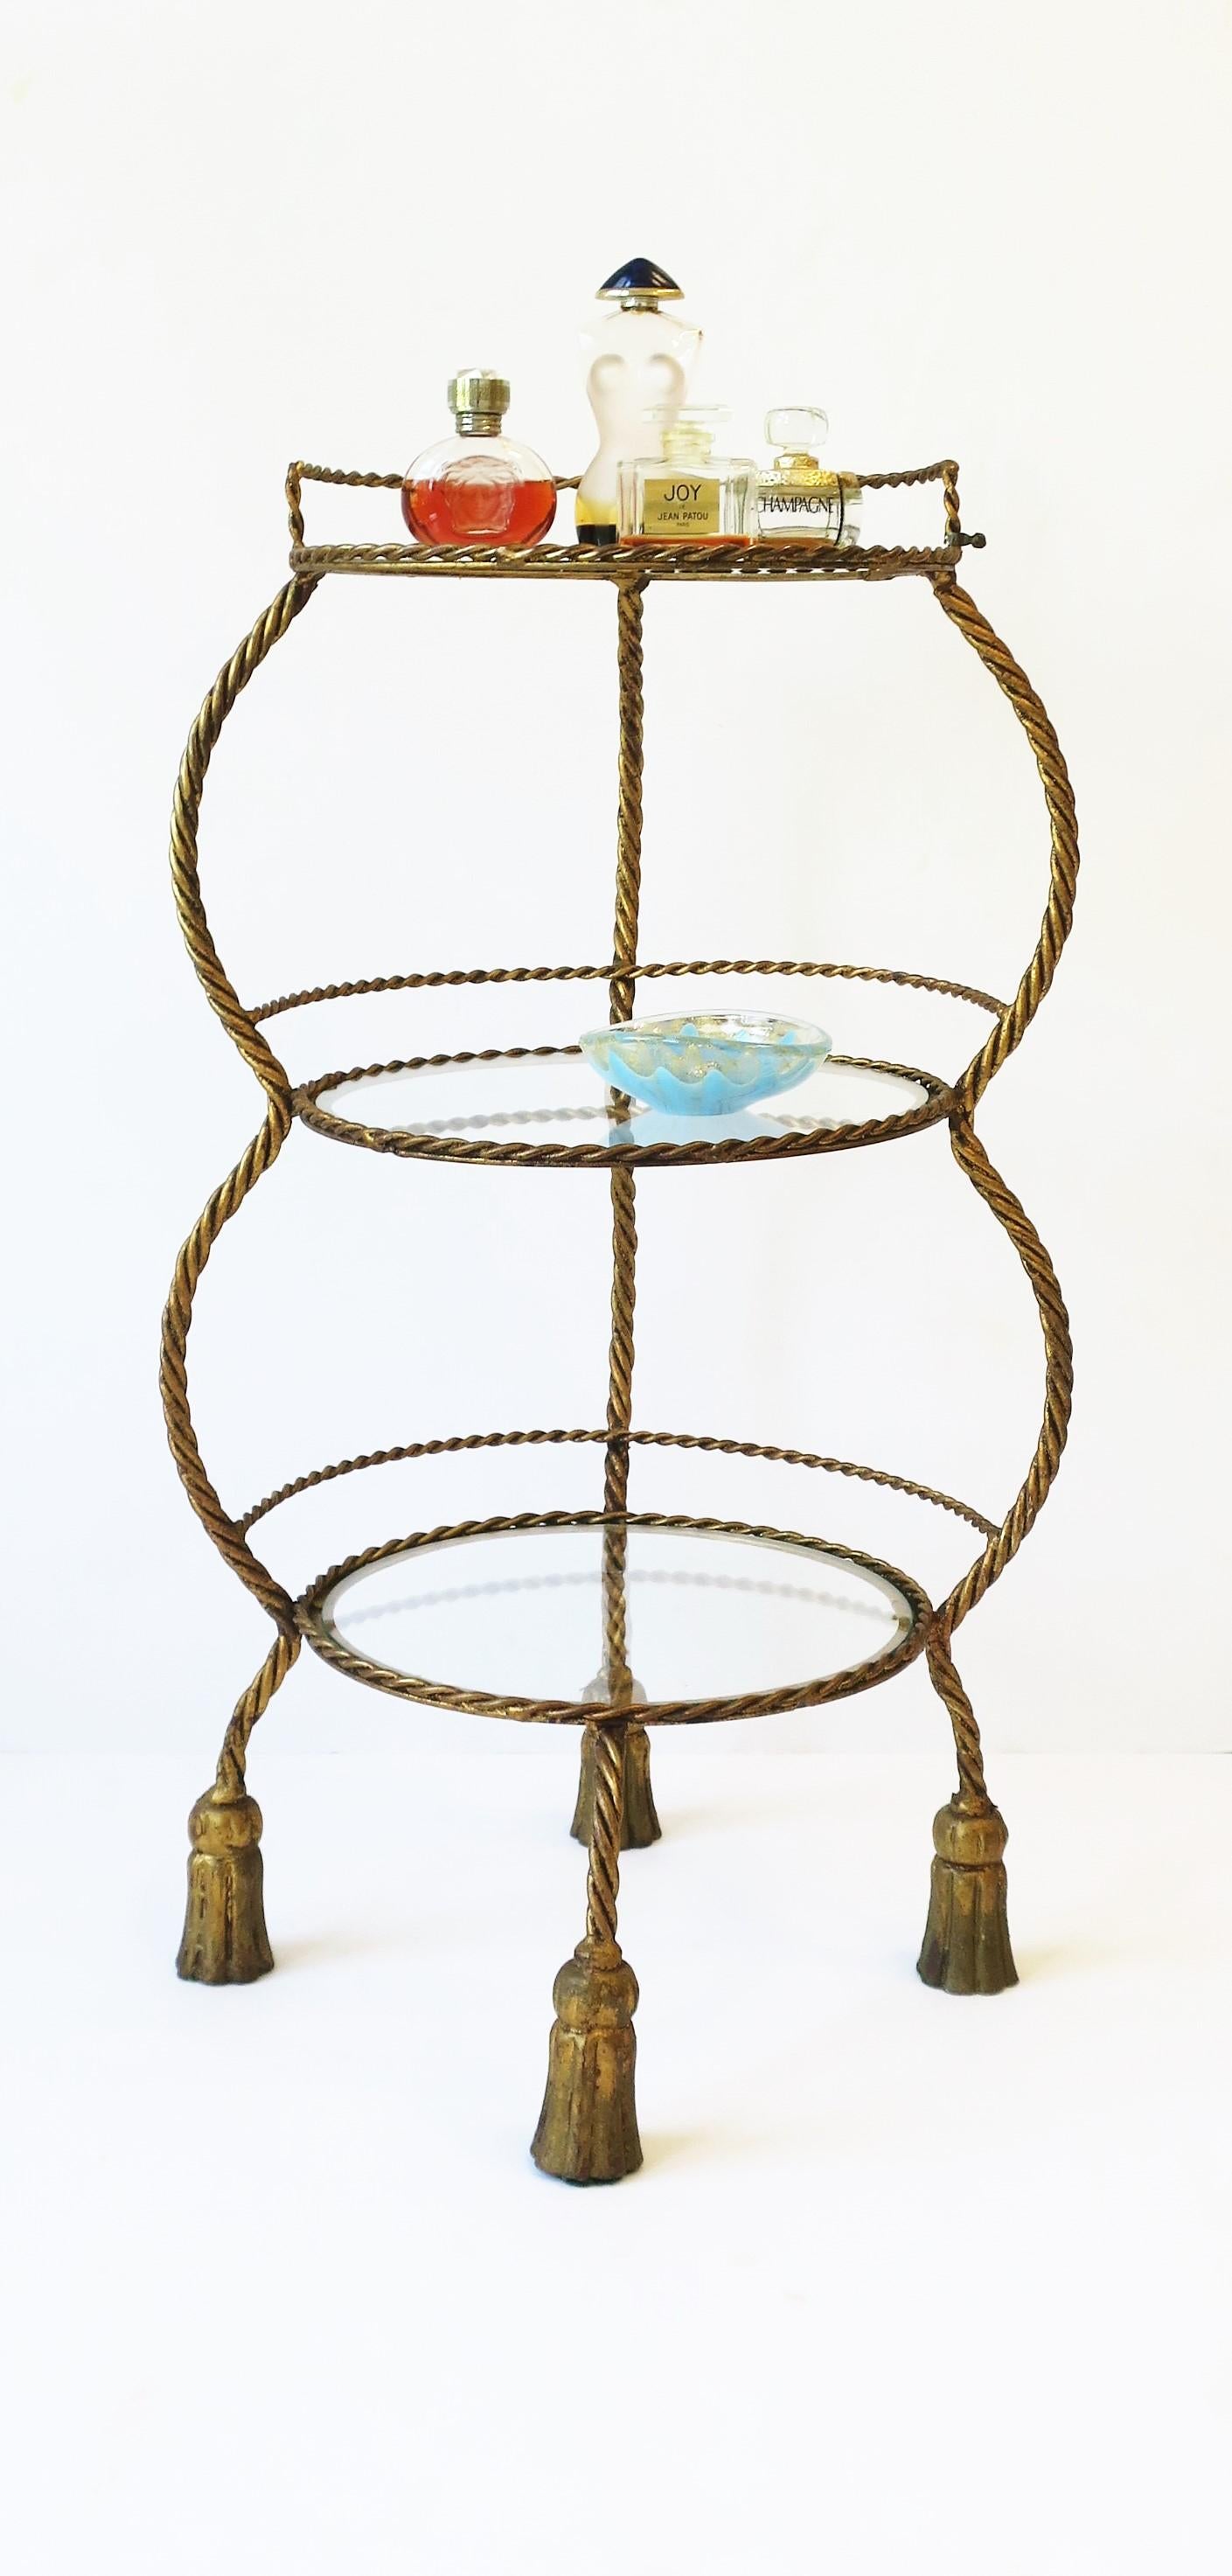 An Italian gold gilt metal tole étagère storage or display piece with rope and tassel design, circa mid-20th century, 1950s, Italy. Piece is documented/marked with metal tag reading 